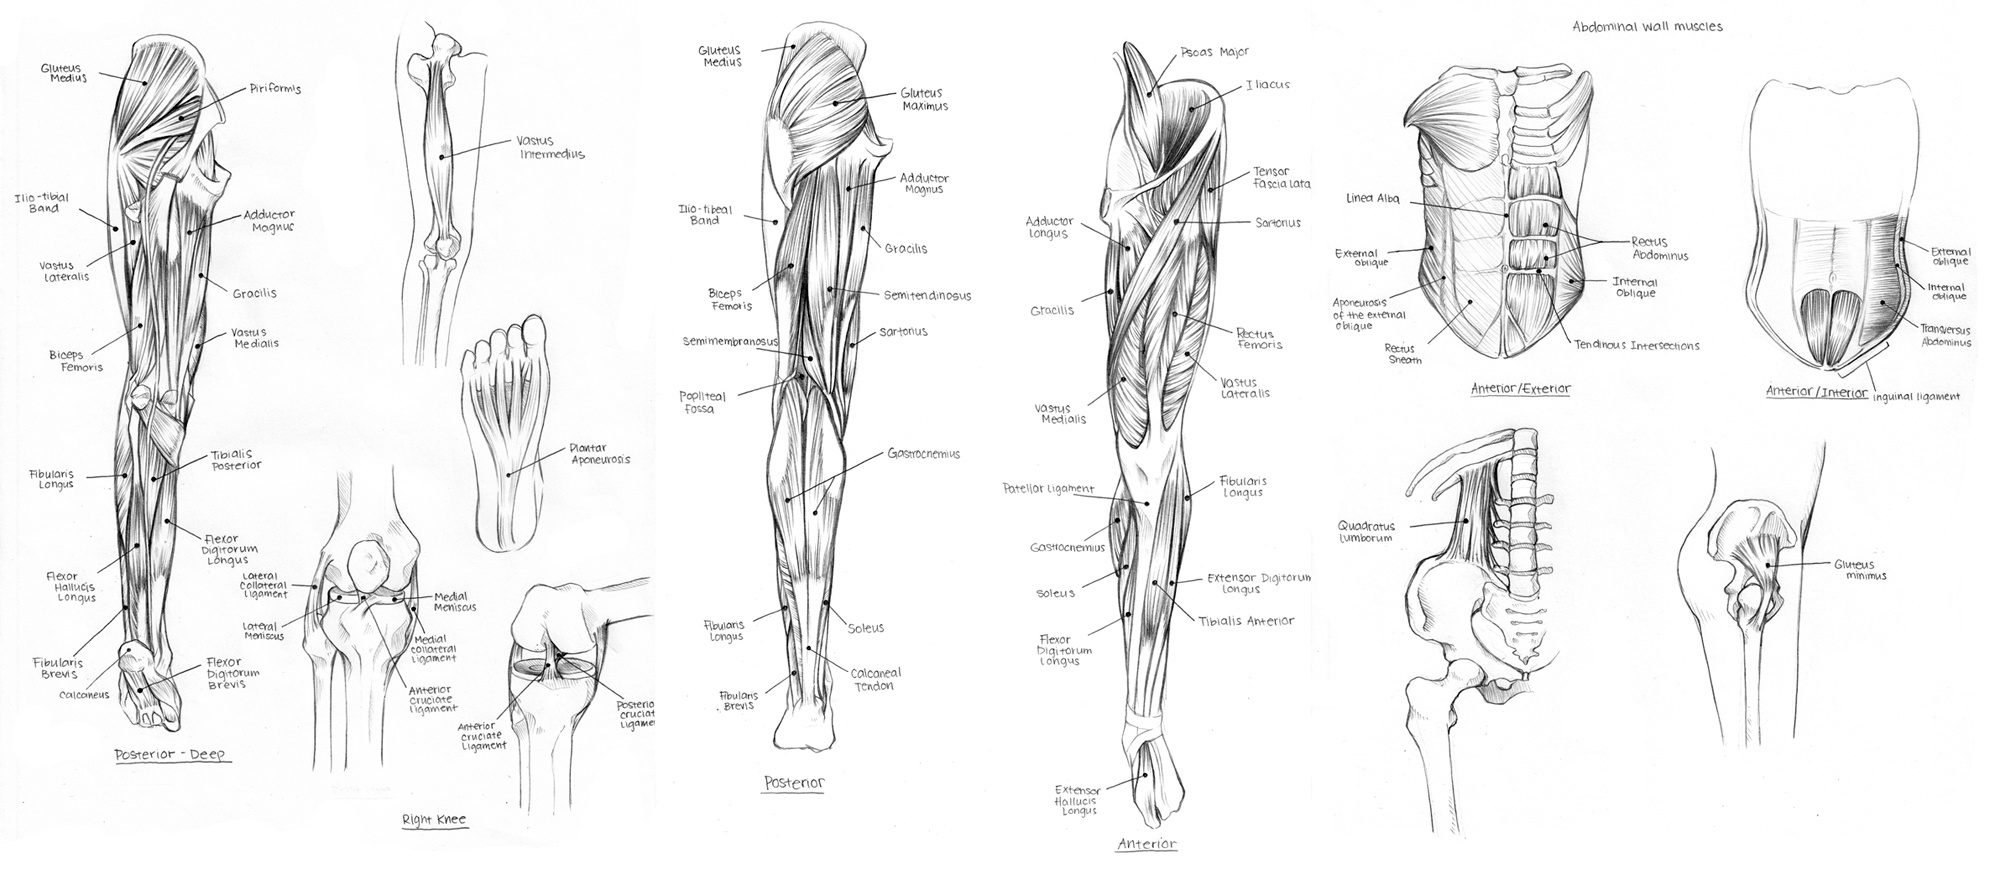 a diagram of muscles in the body muscles of the body diagram without labels.jpg